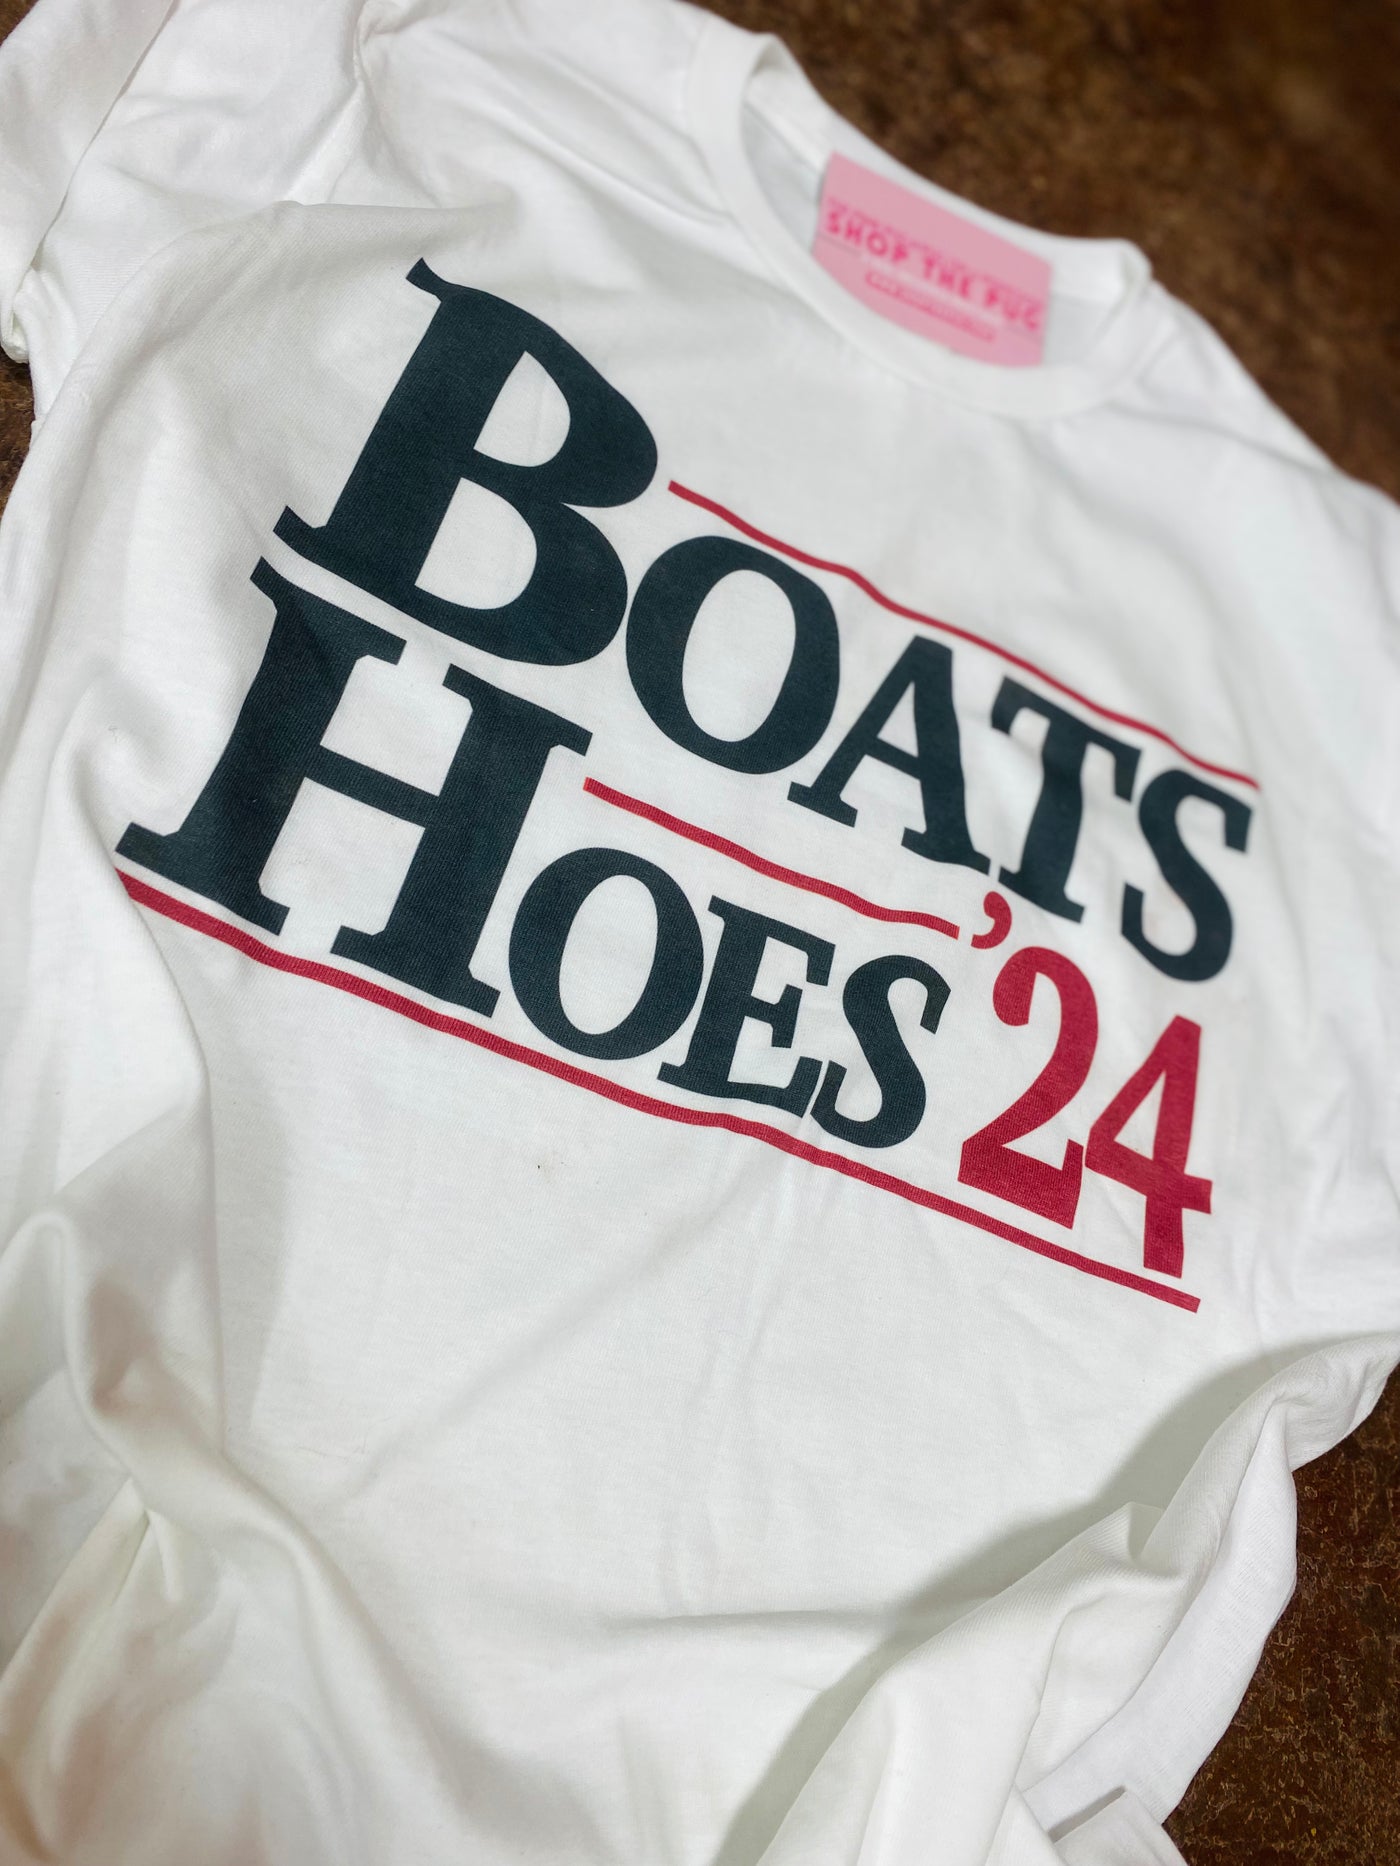 Boats & Hoes Graphic Tee